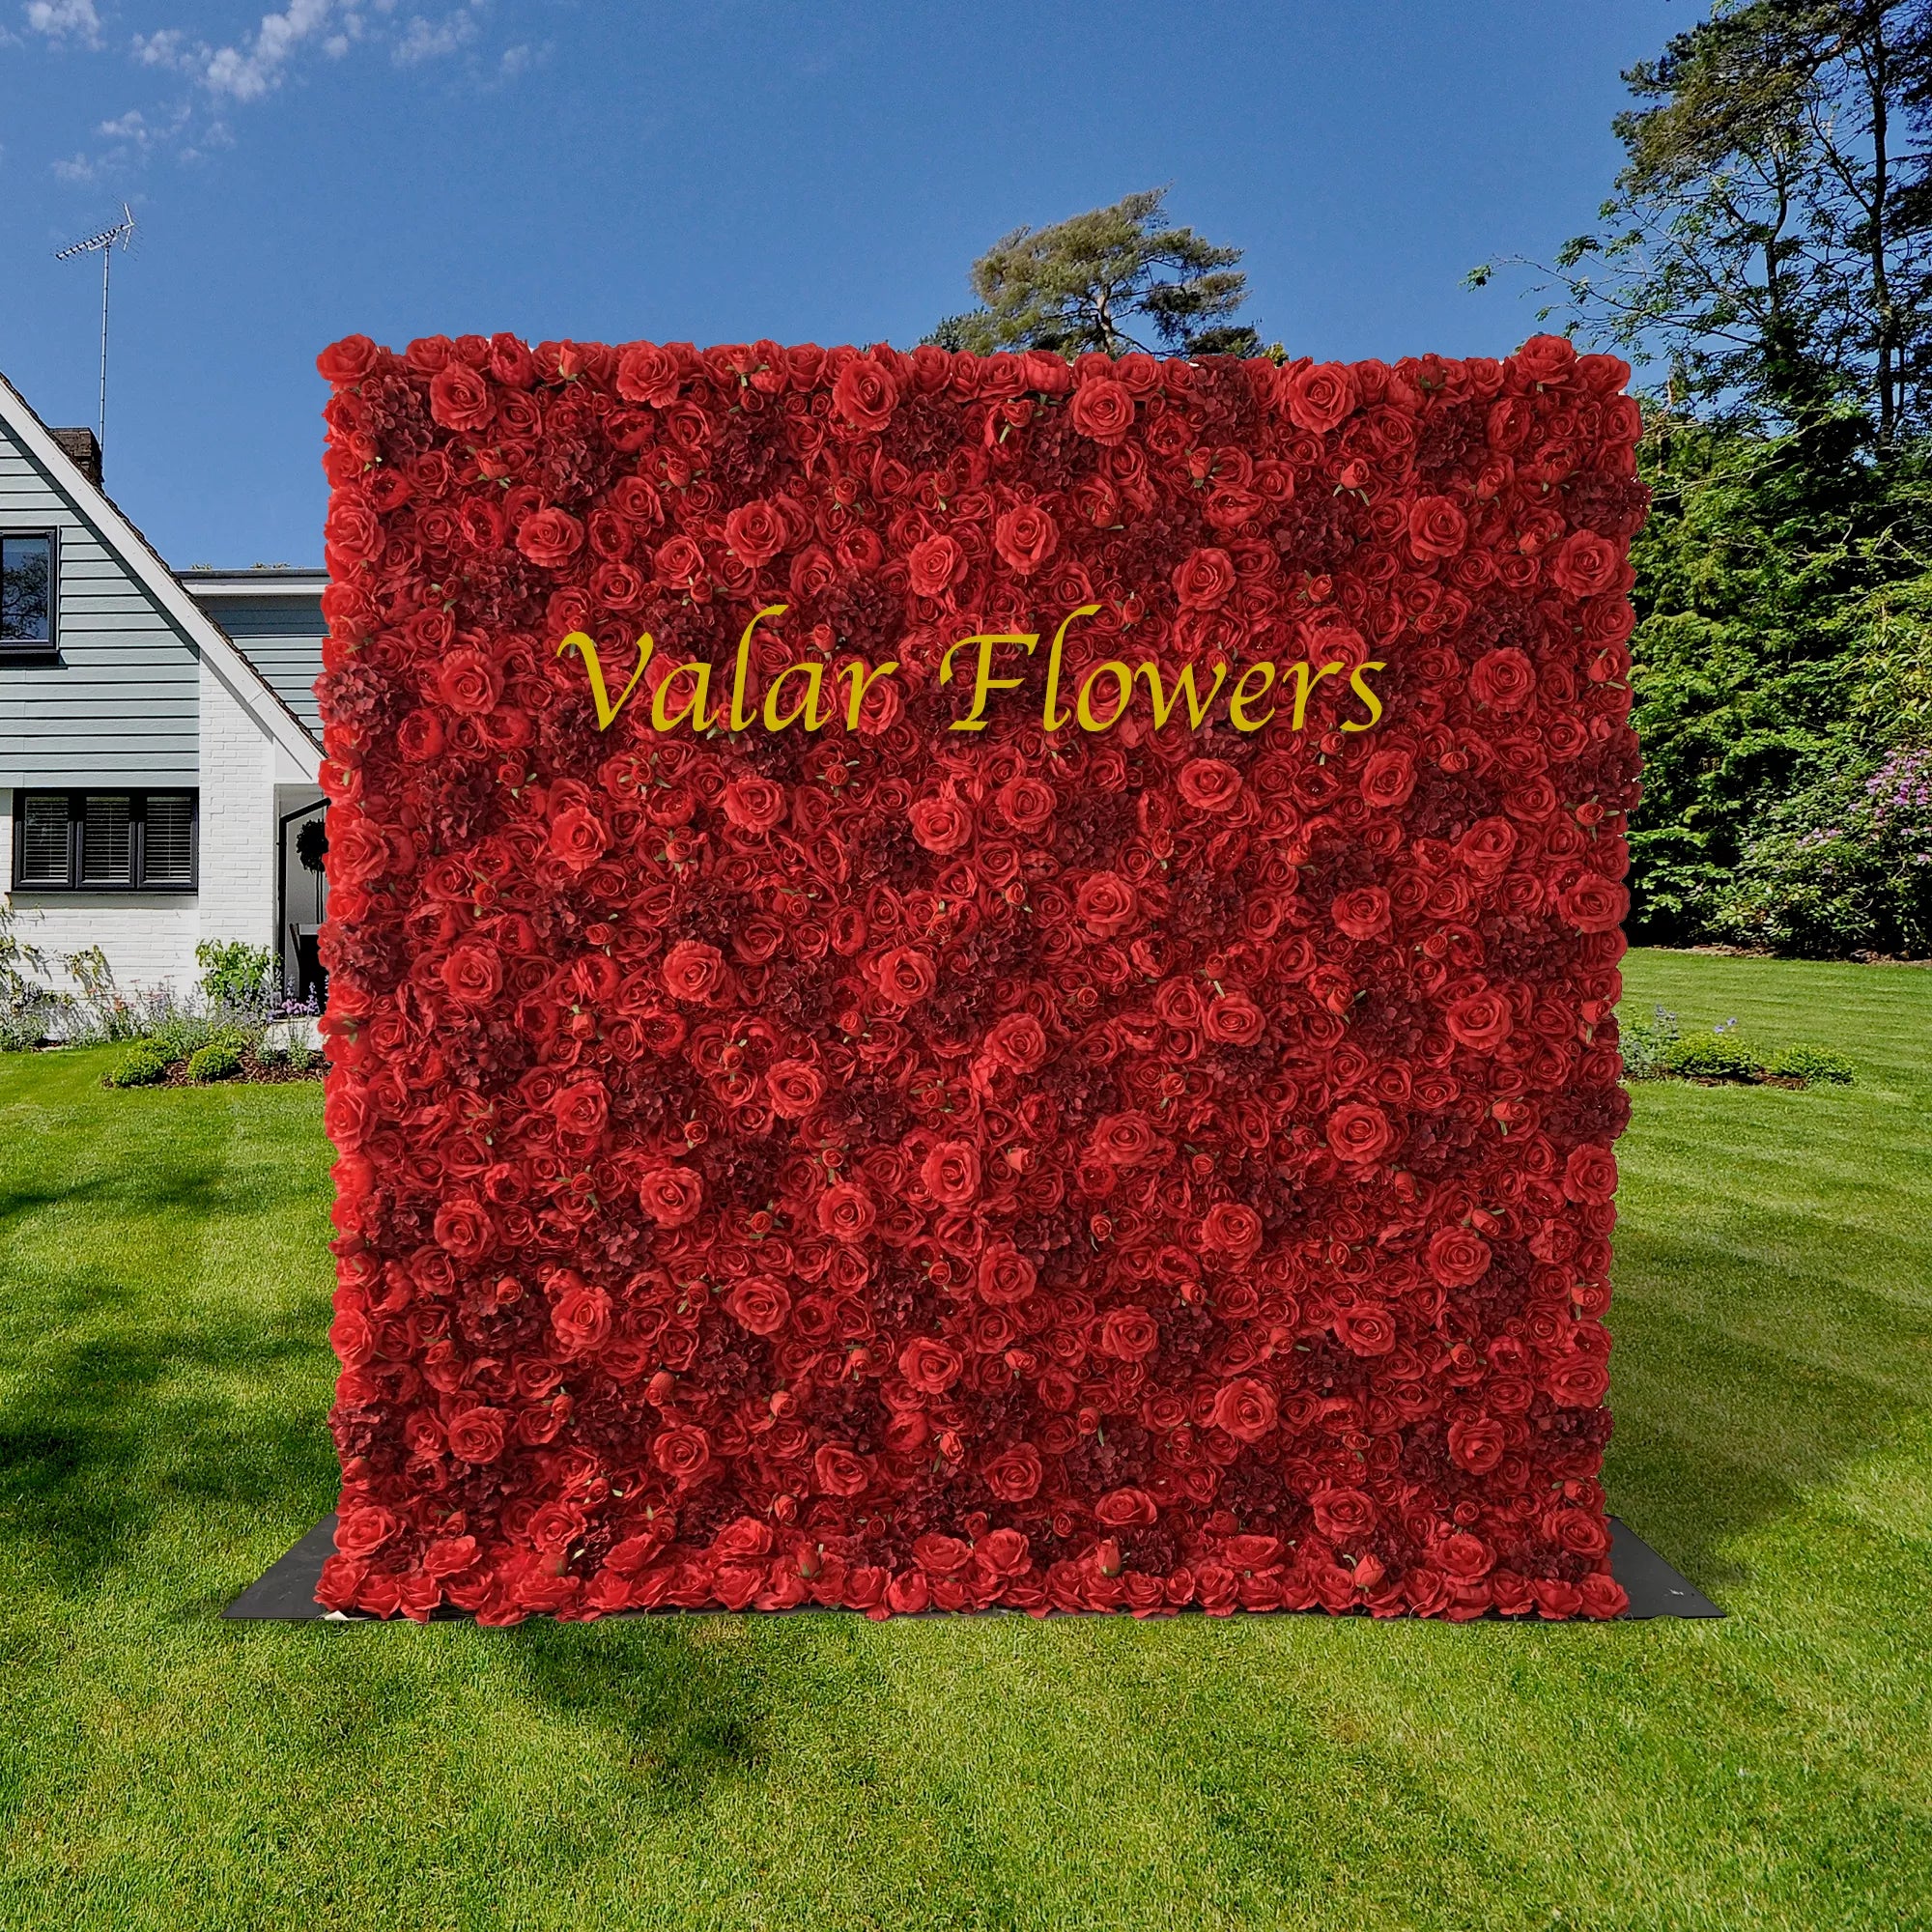 Valar Flowers Roll Up Fabric Artificial Flower Wall Wedding Backdrop, Floral Party Decor, Event Photography-VF-034